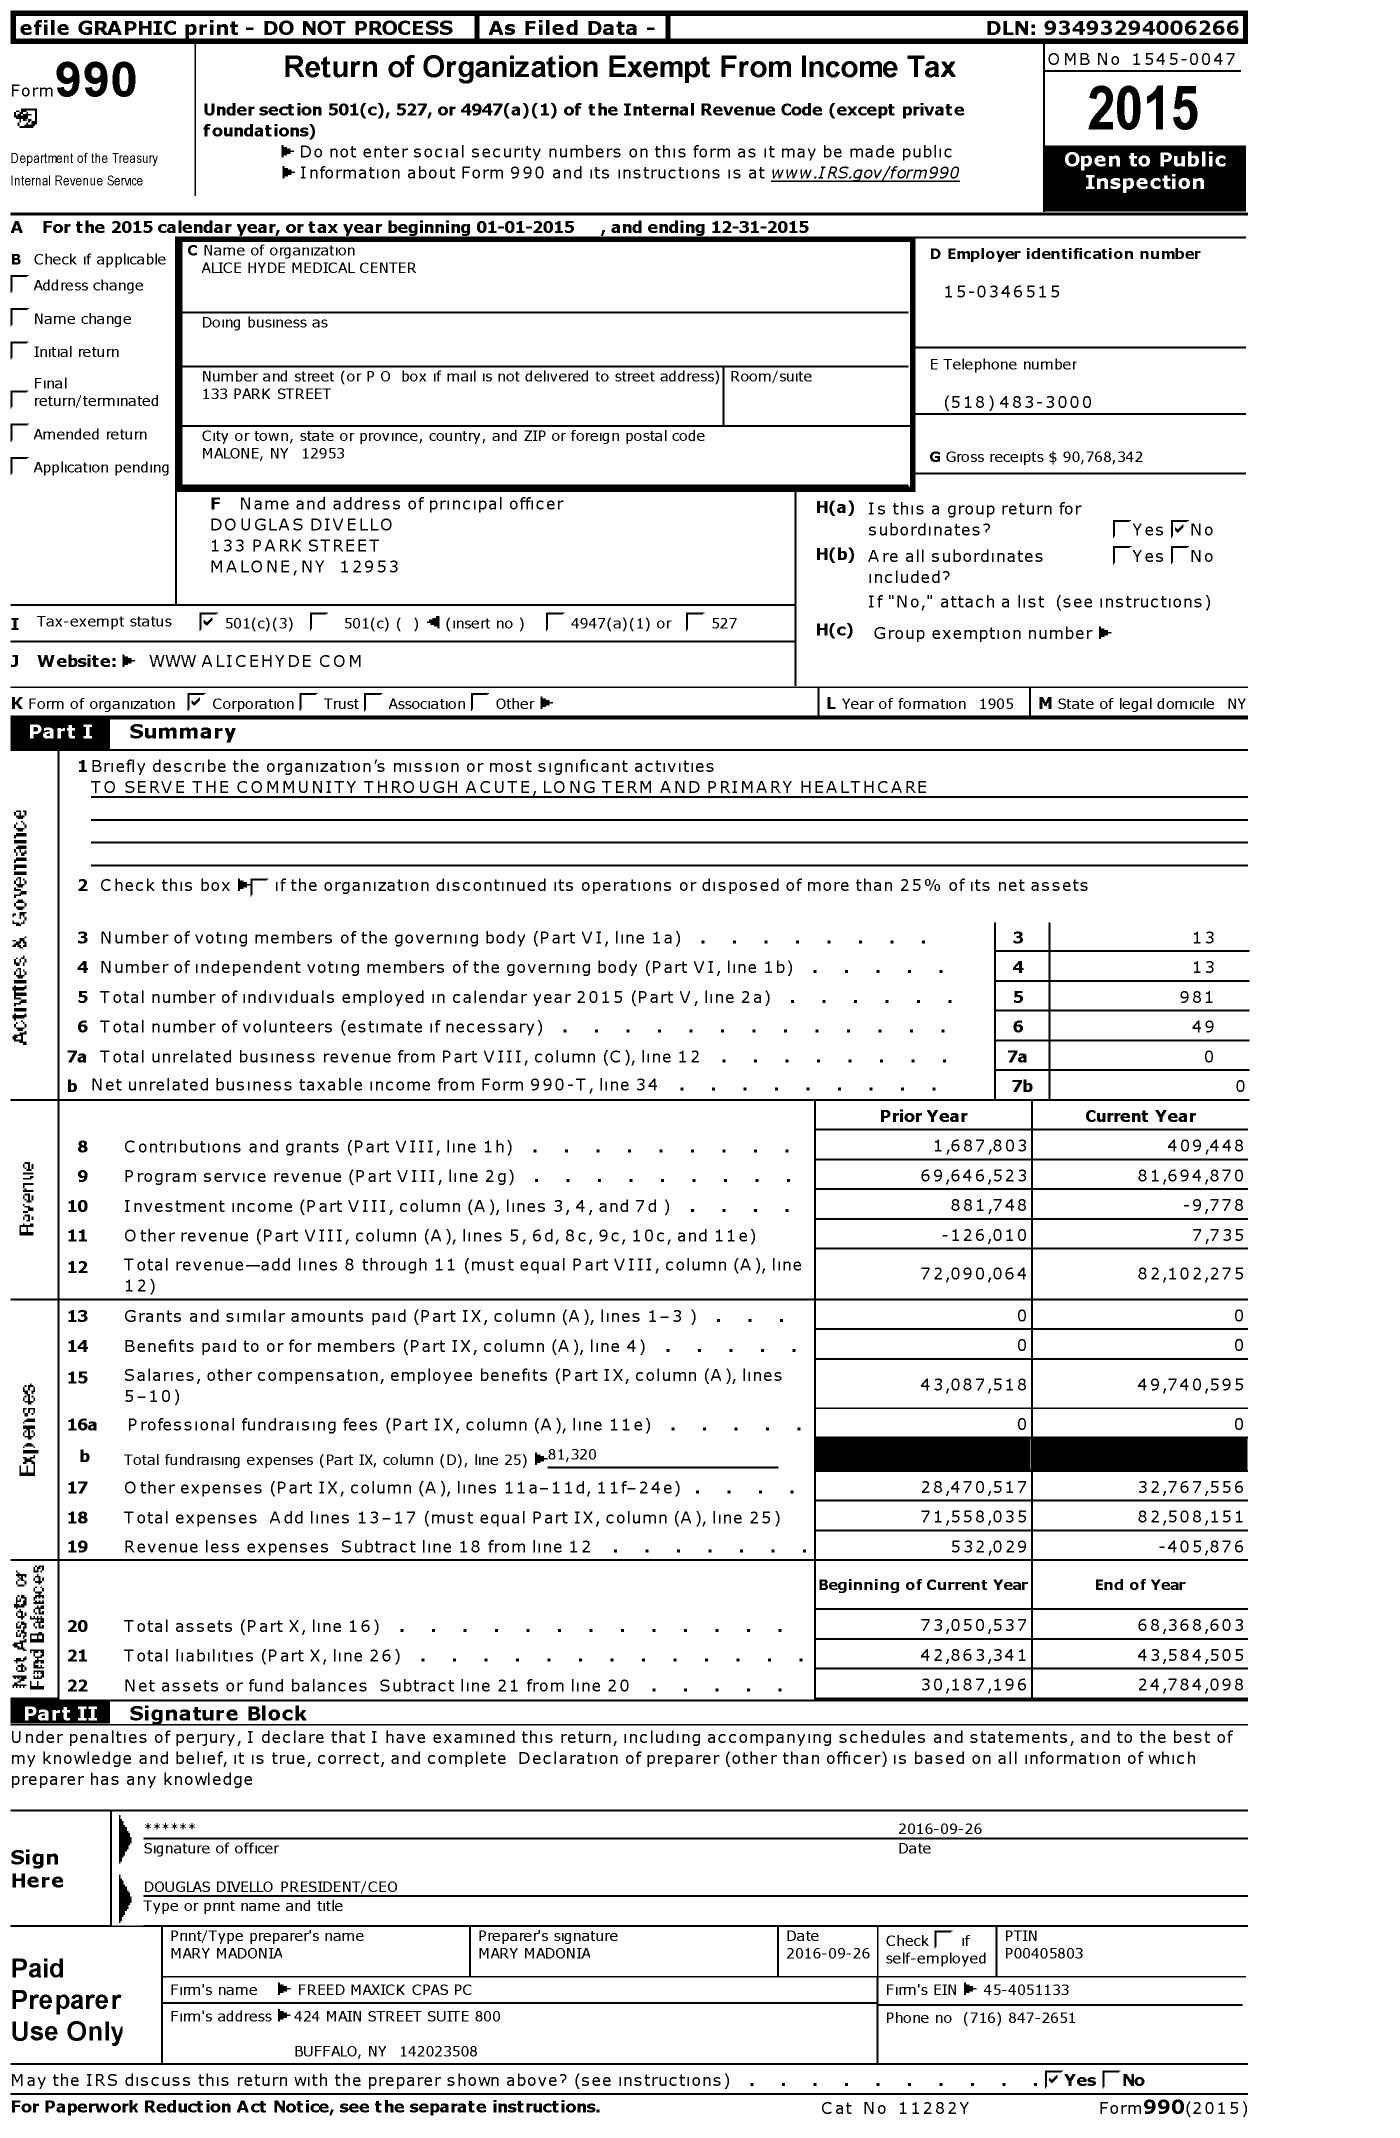 Image of first page of 2015 Form 990 for Alice Hyde Medical Center (AHMC)